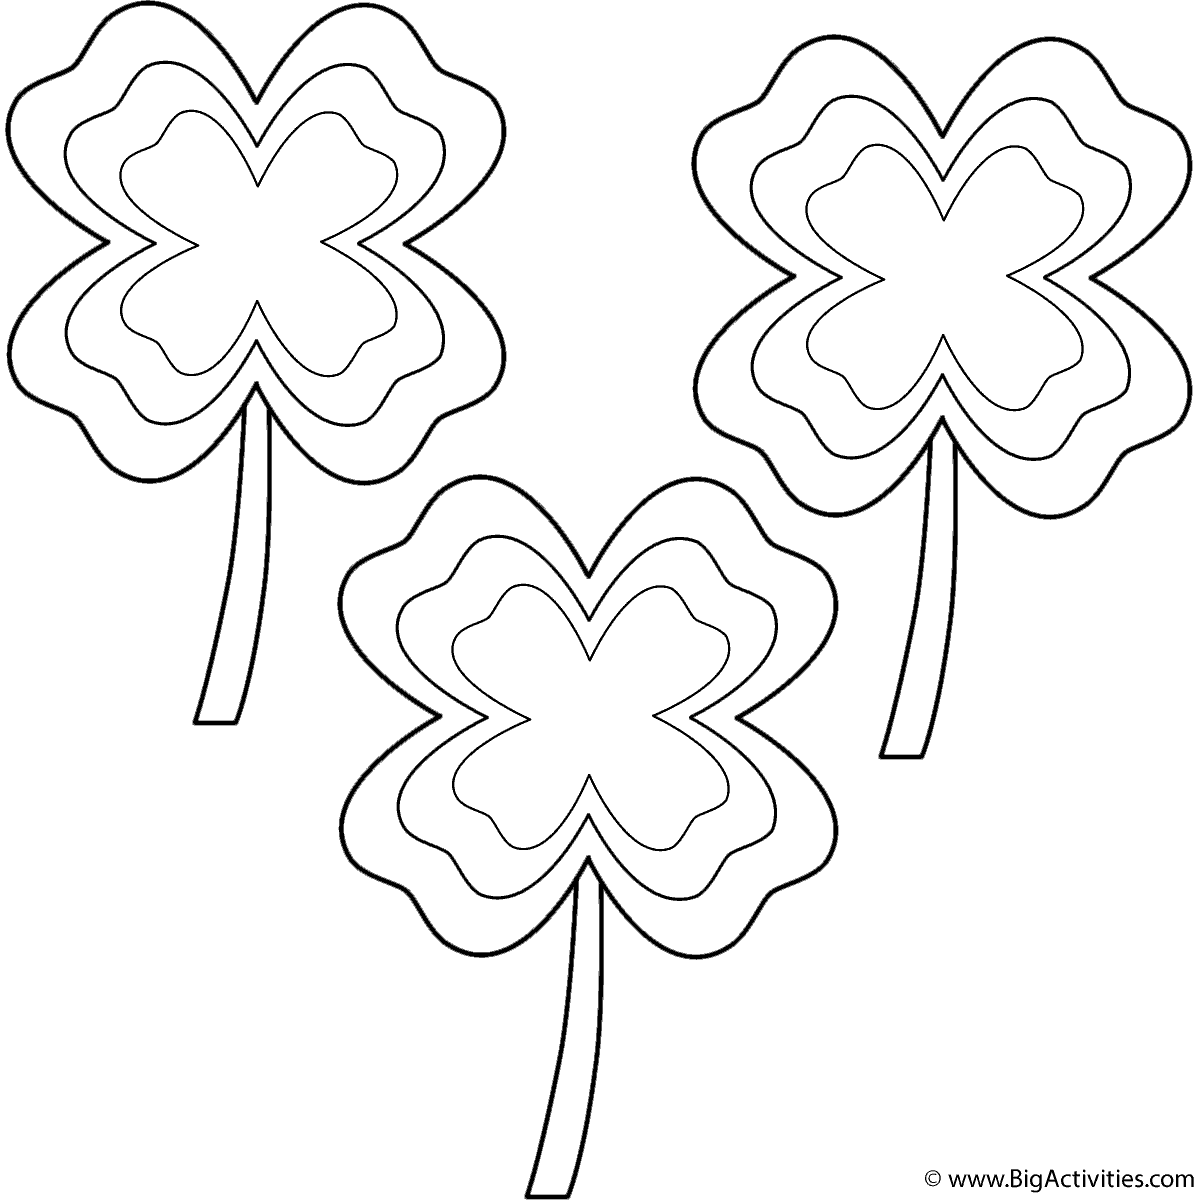 Four Leaf Clovers with multi-border (3 clovers) - Coloring Page (St